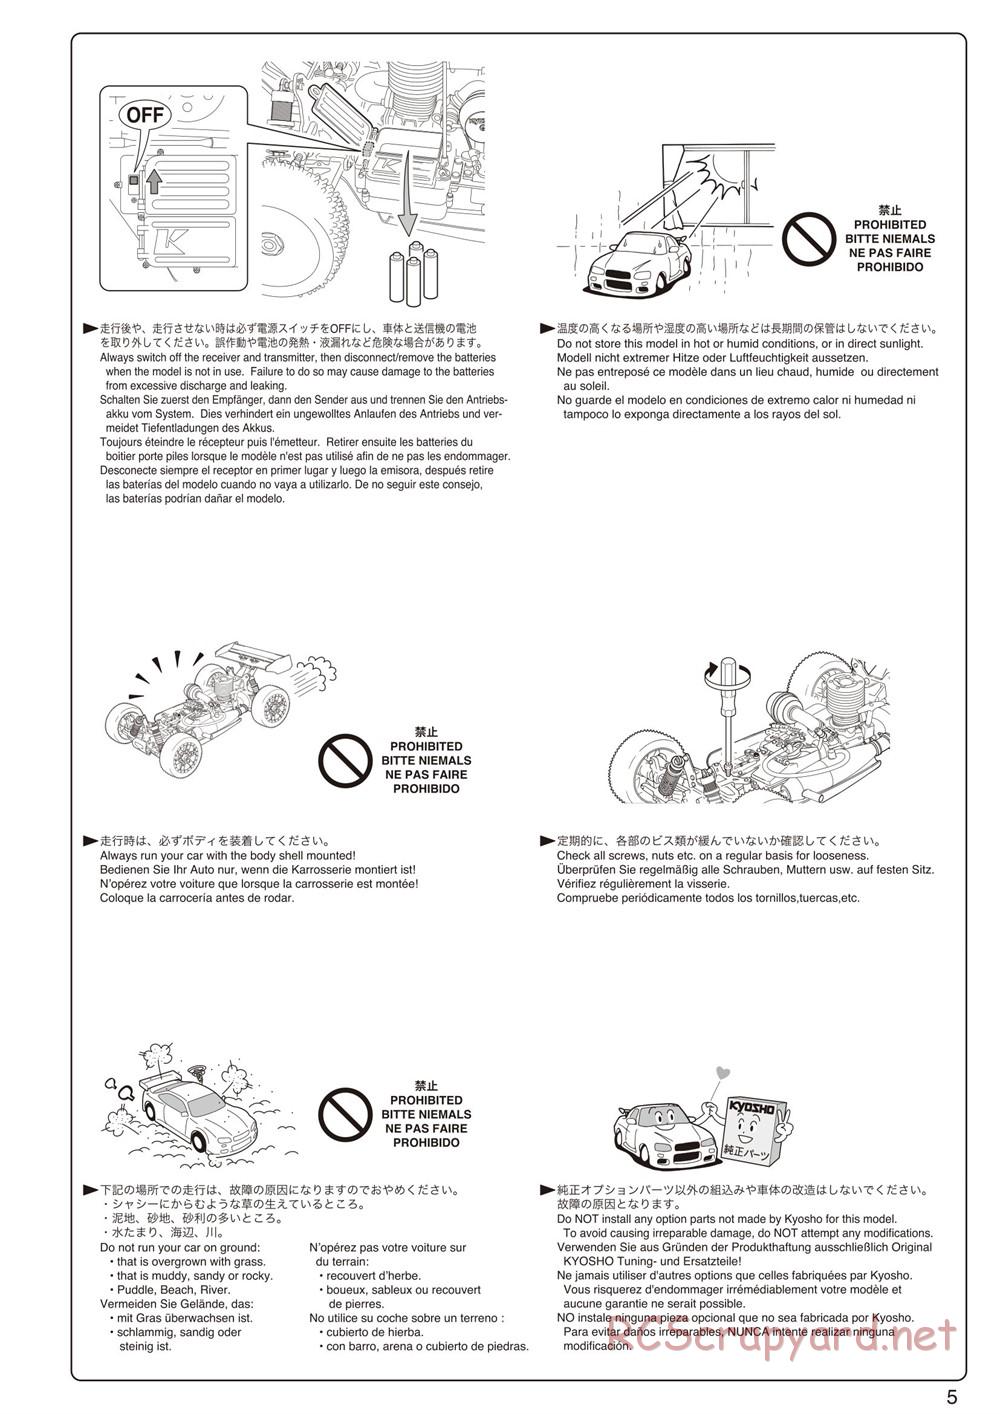 Kyosho - Inferno Neo 2.0 - Manual - Page 5